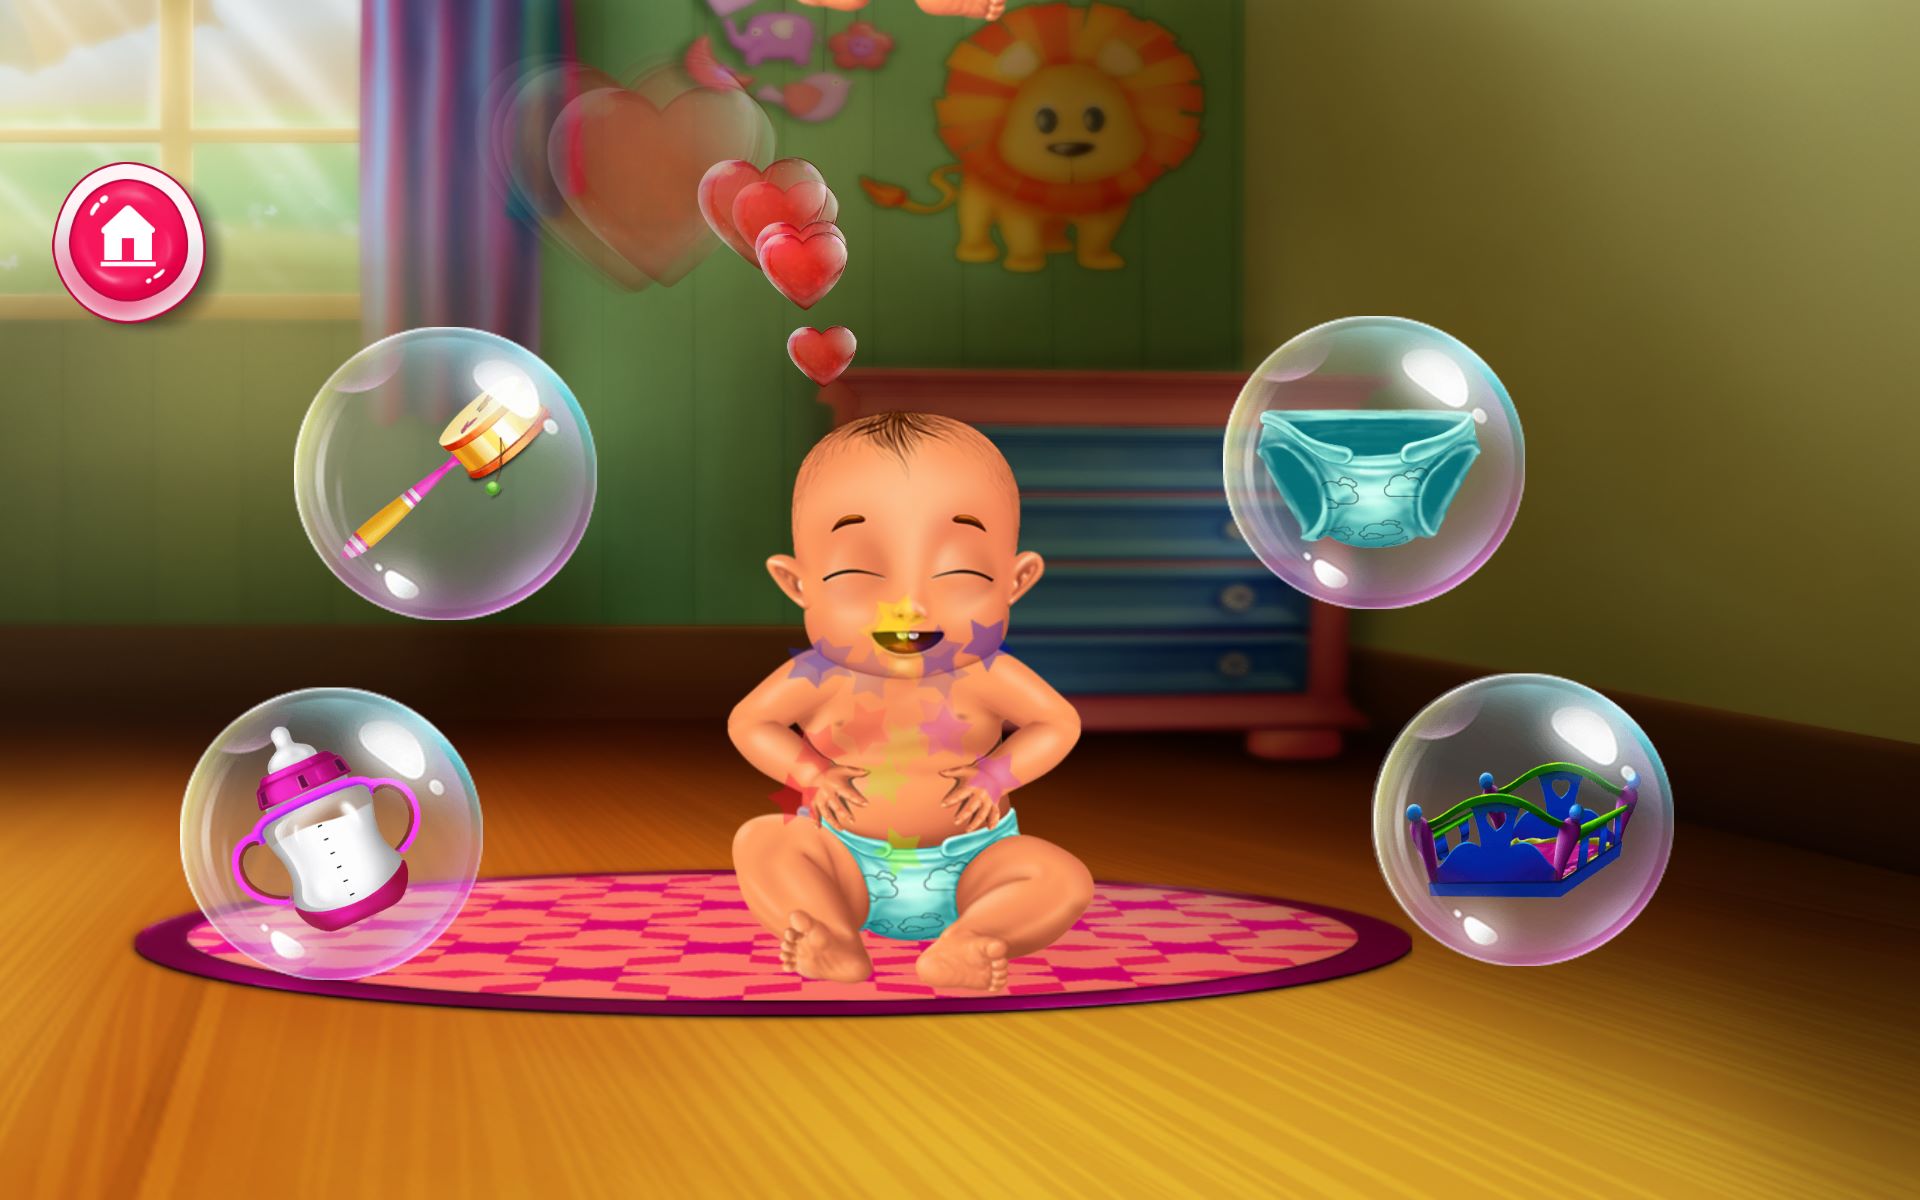 Baby Girl Daily Care - Microsoft Apps